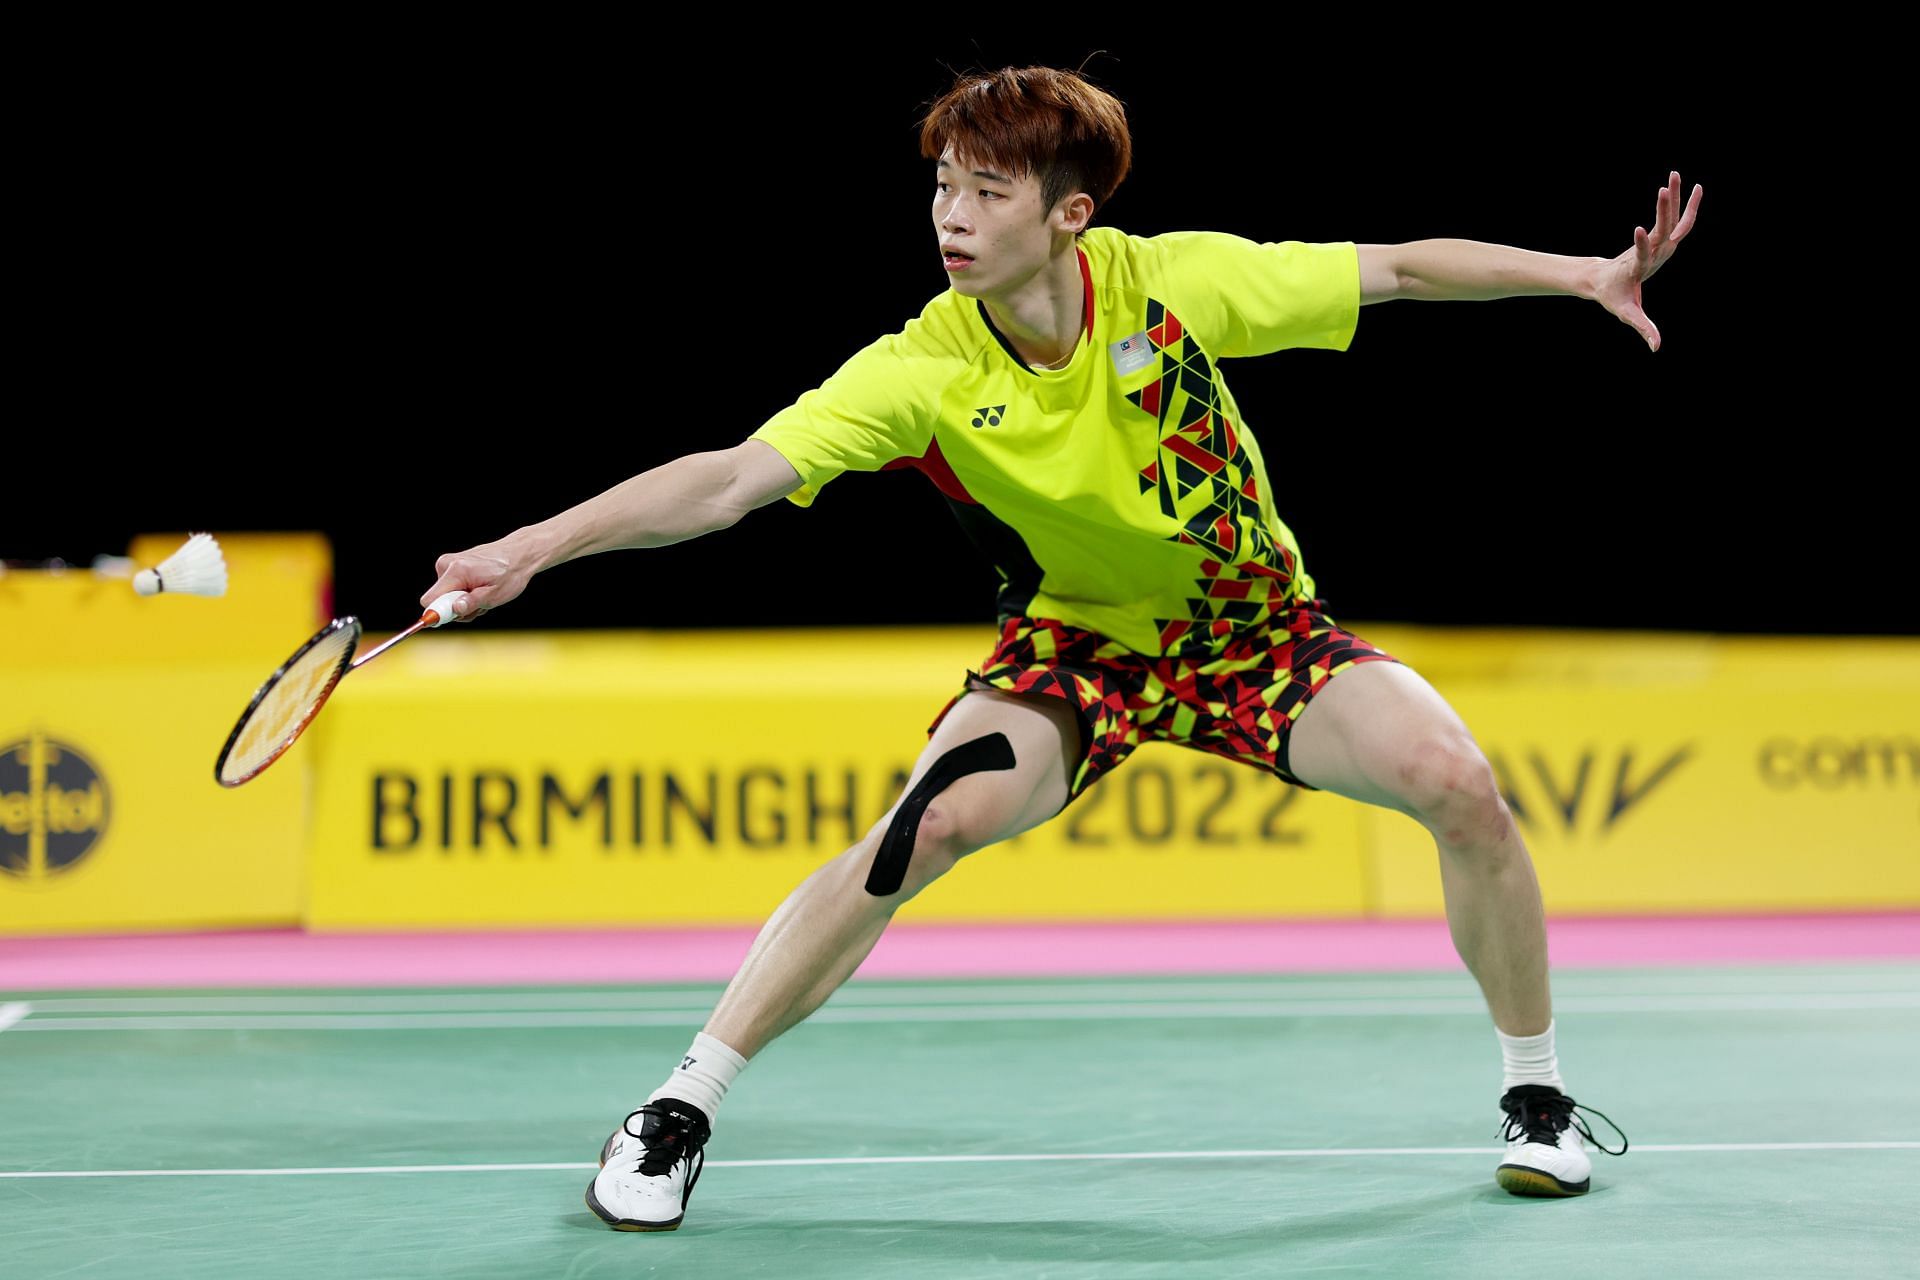 Tze Yong NG in action at the 2022 Commonwealth Games (Image courtesy: Getty)